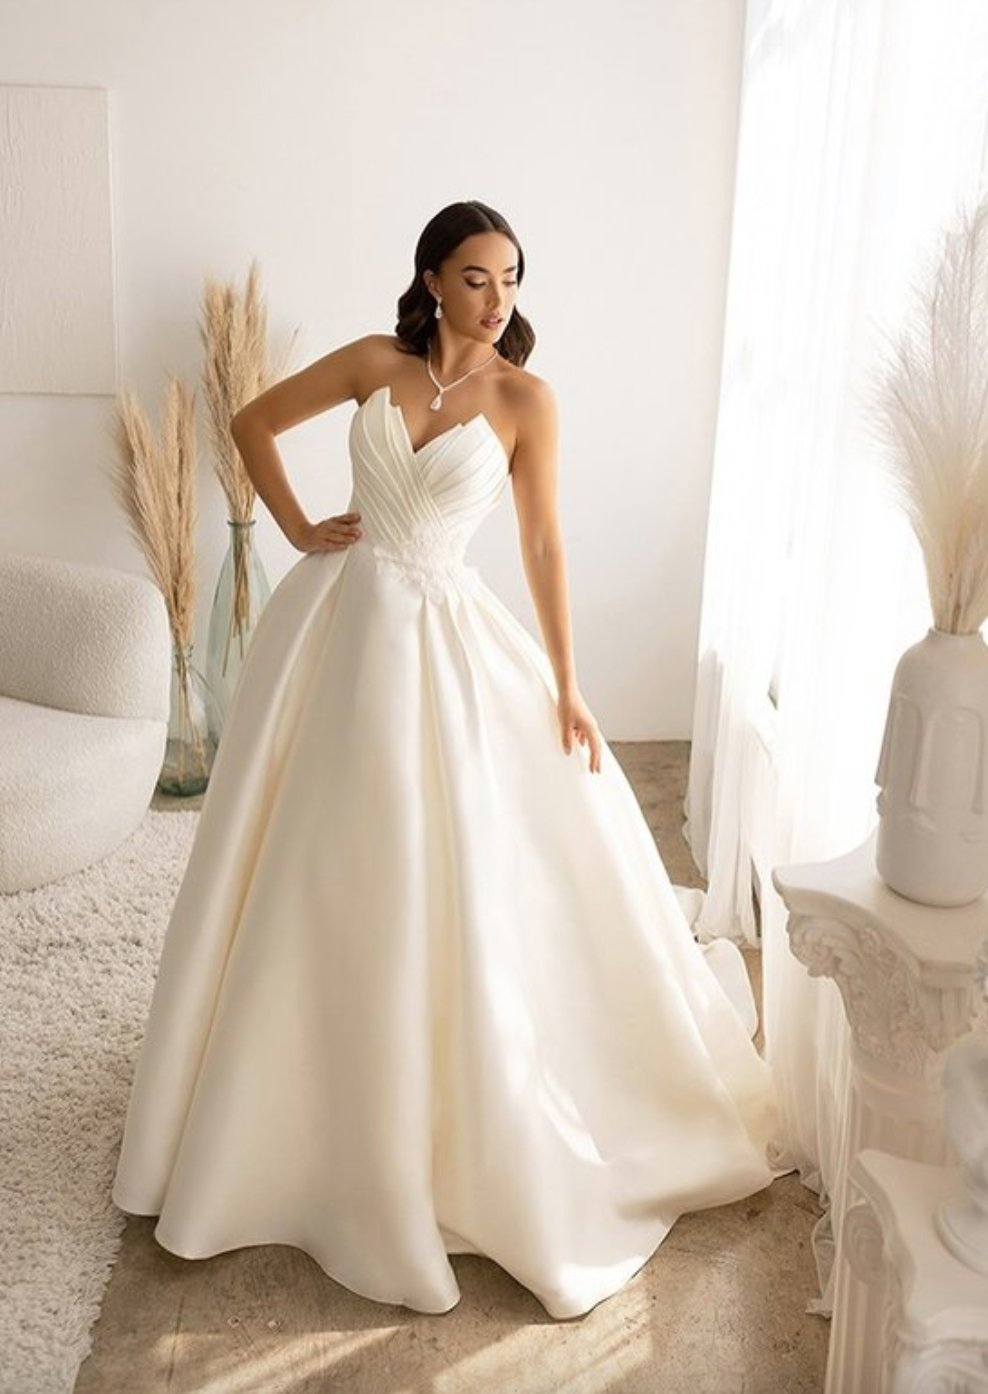 Satin Tulip Sweetheart neckline with Lace Bridal dress